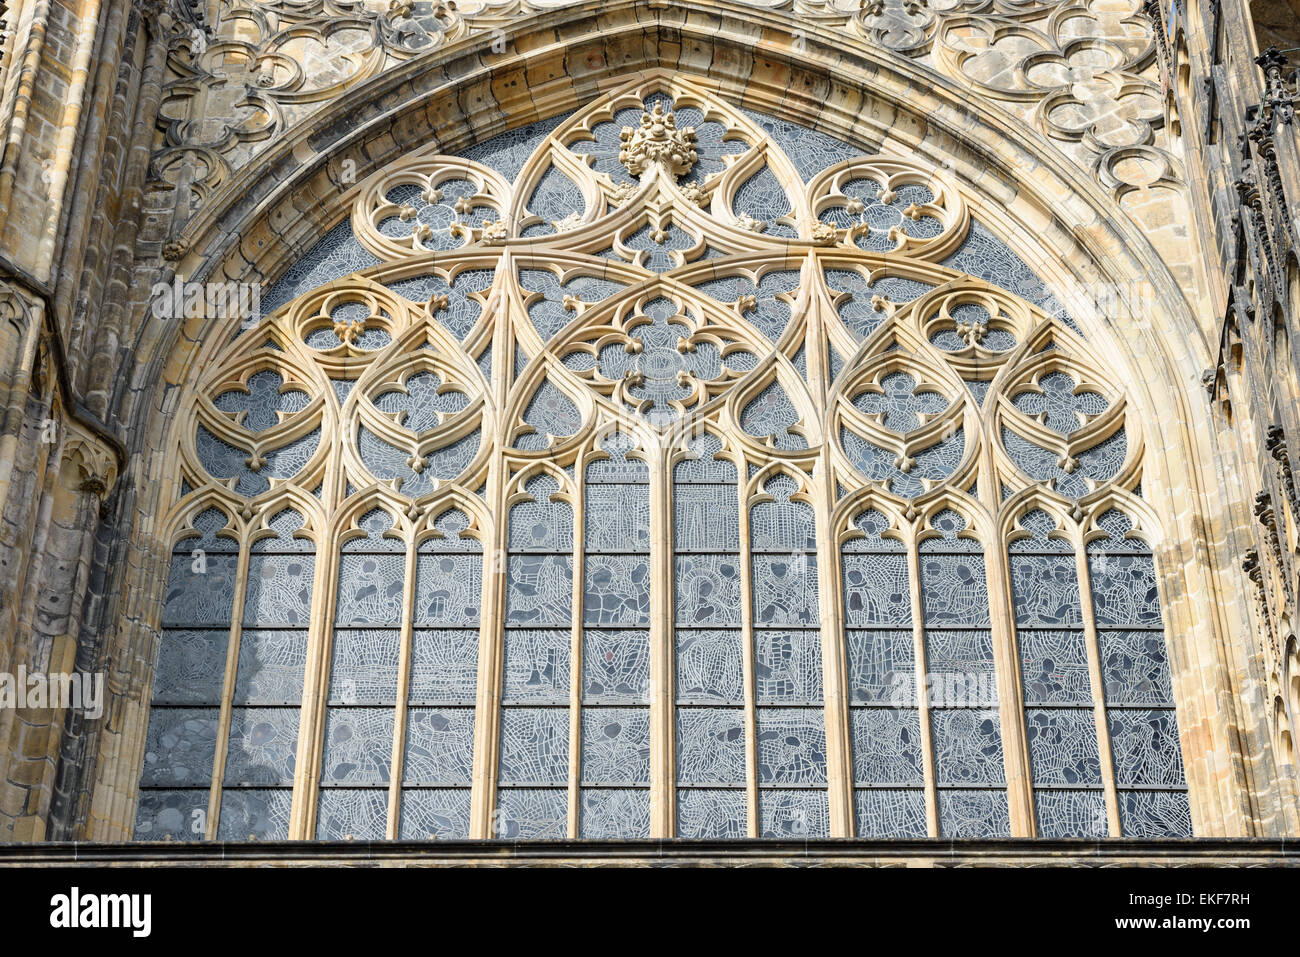 Exterior view of stained-glass window with tracery of cut stone in wide pointed arch above Golden Gate of St. Vitus Cathedral, P Stock Photo